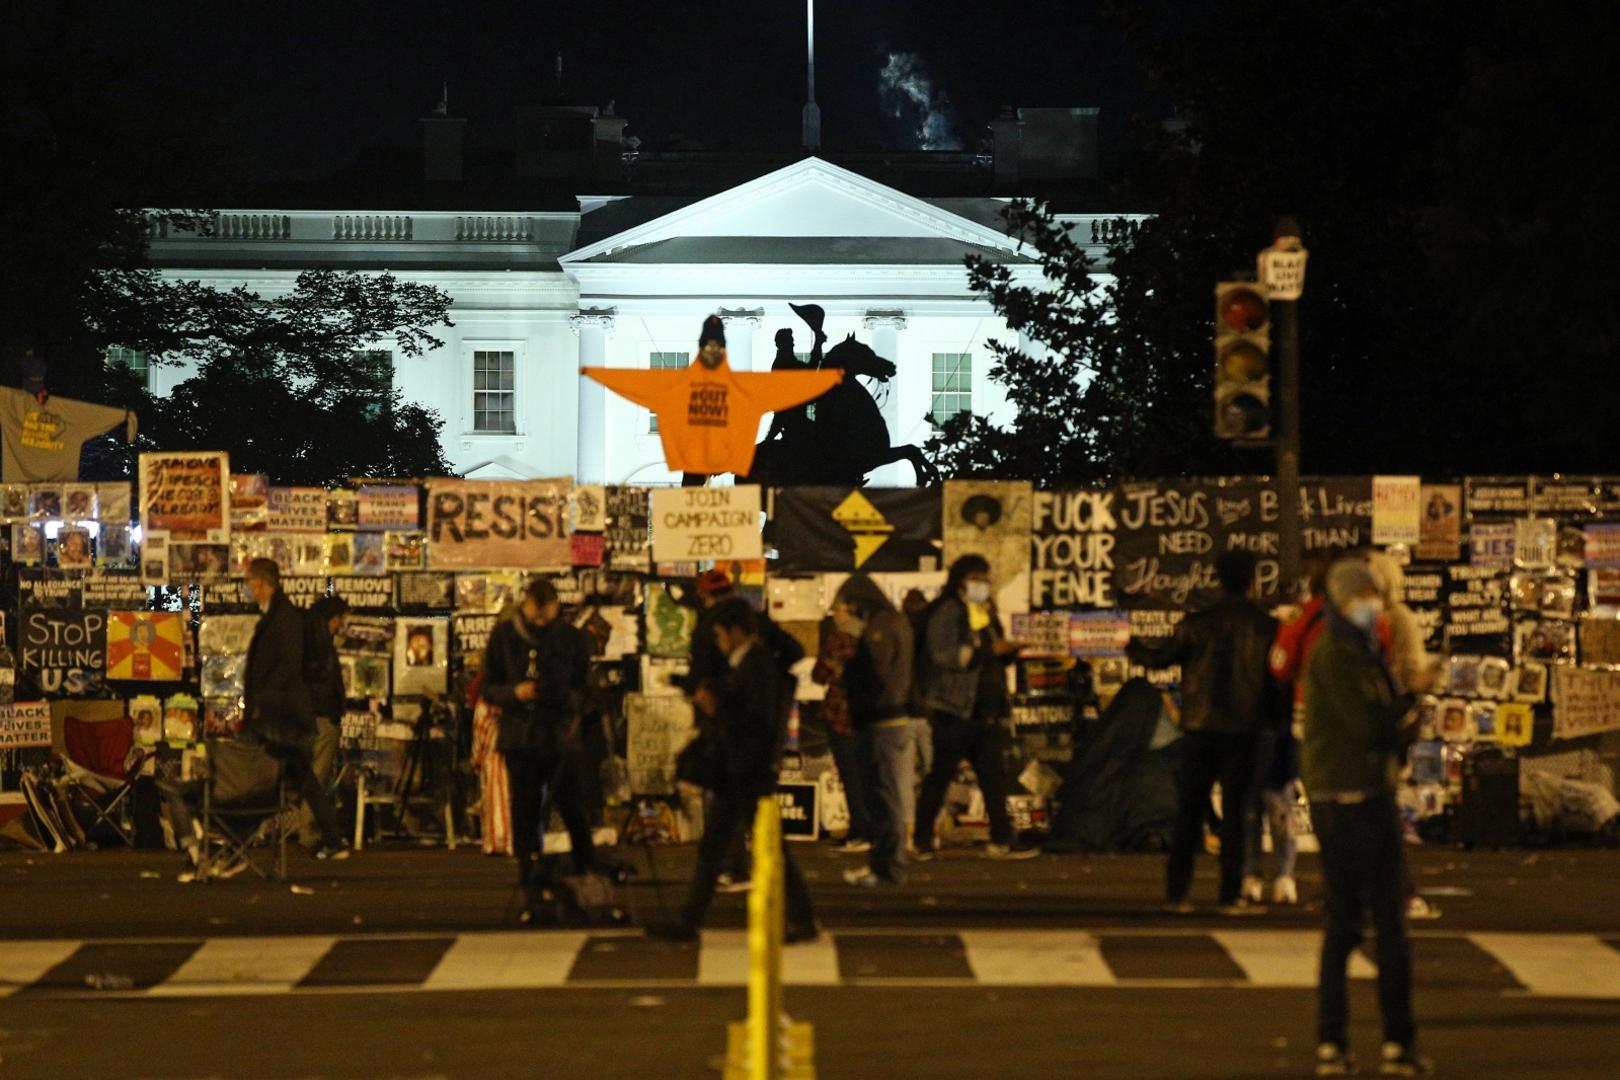 WASHINGTON, D.C., USA - NOVEMBER 4, 2020: Protesters seen outside the White House after Election Day. On November 3, 2020, the United States elected its president and vice president, 35 Senators, all 435 members of the House of Representatives, 13 governors of 11 states and two US territories, as well as state and local government officials. Incumbent Republican President Donald Trump and Democratic Party nominee Joe Biden are running for president. Yegor Aleyev/TASS Photo via Newscom Newscom/PIXSELL